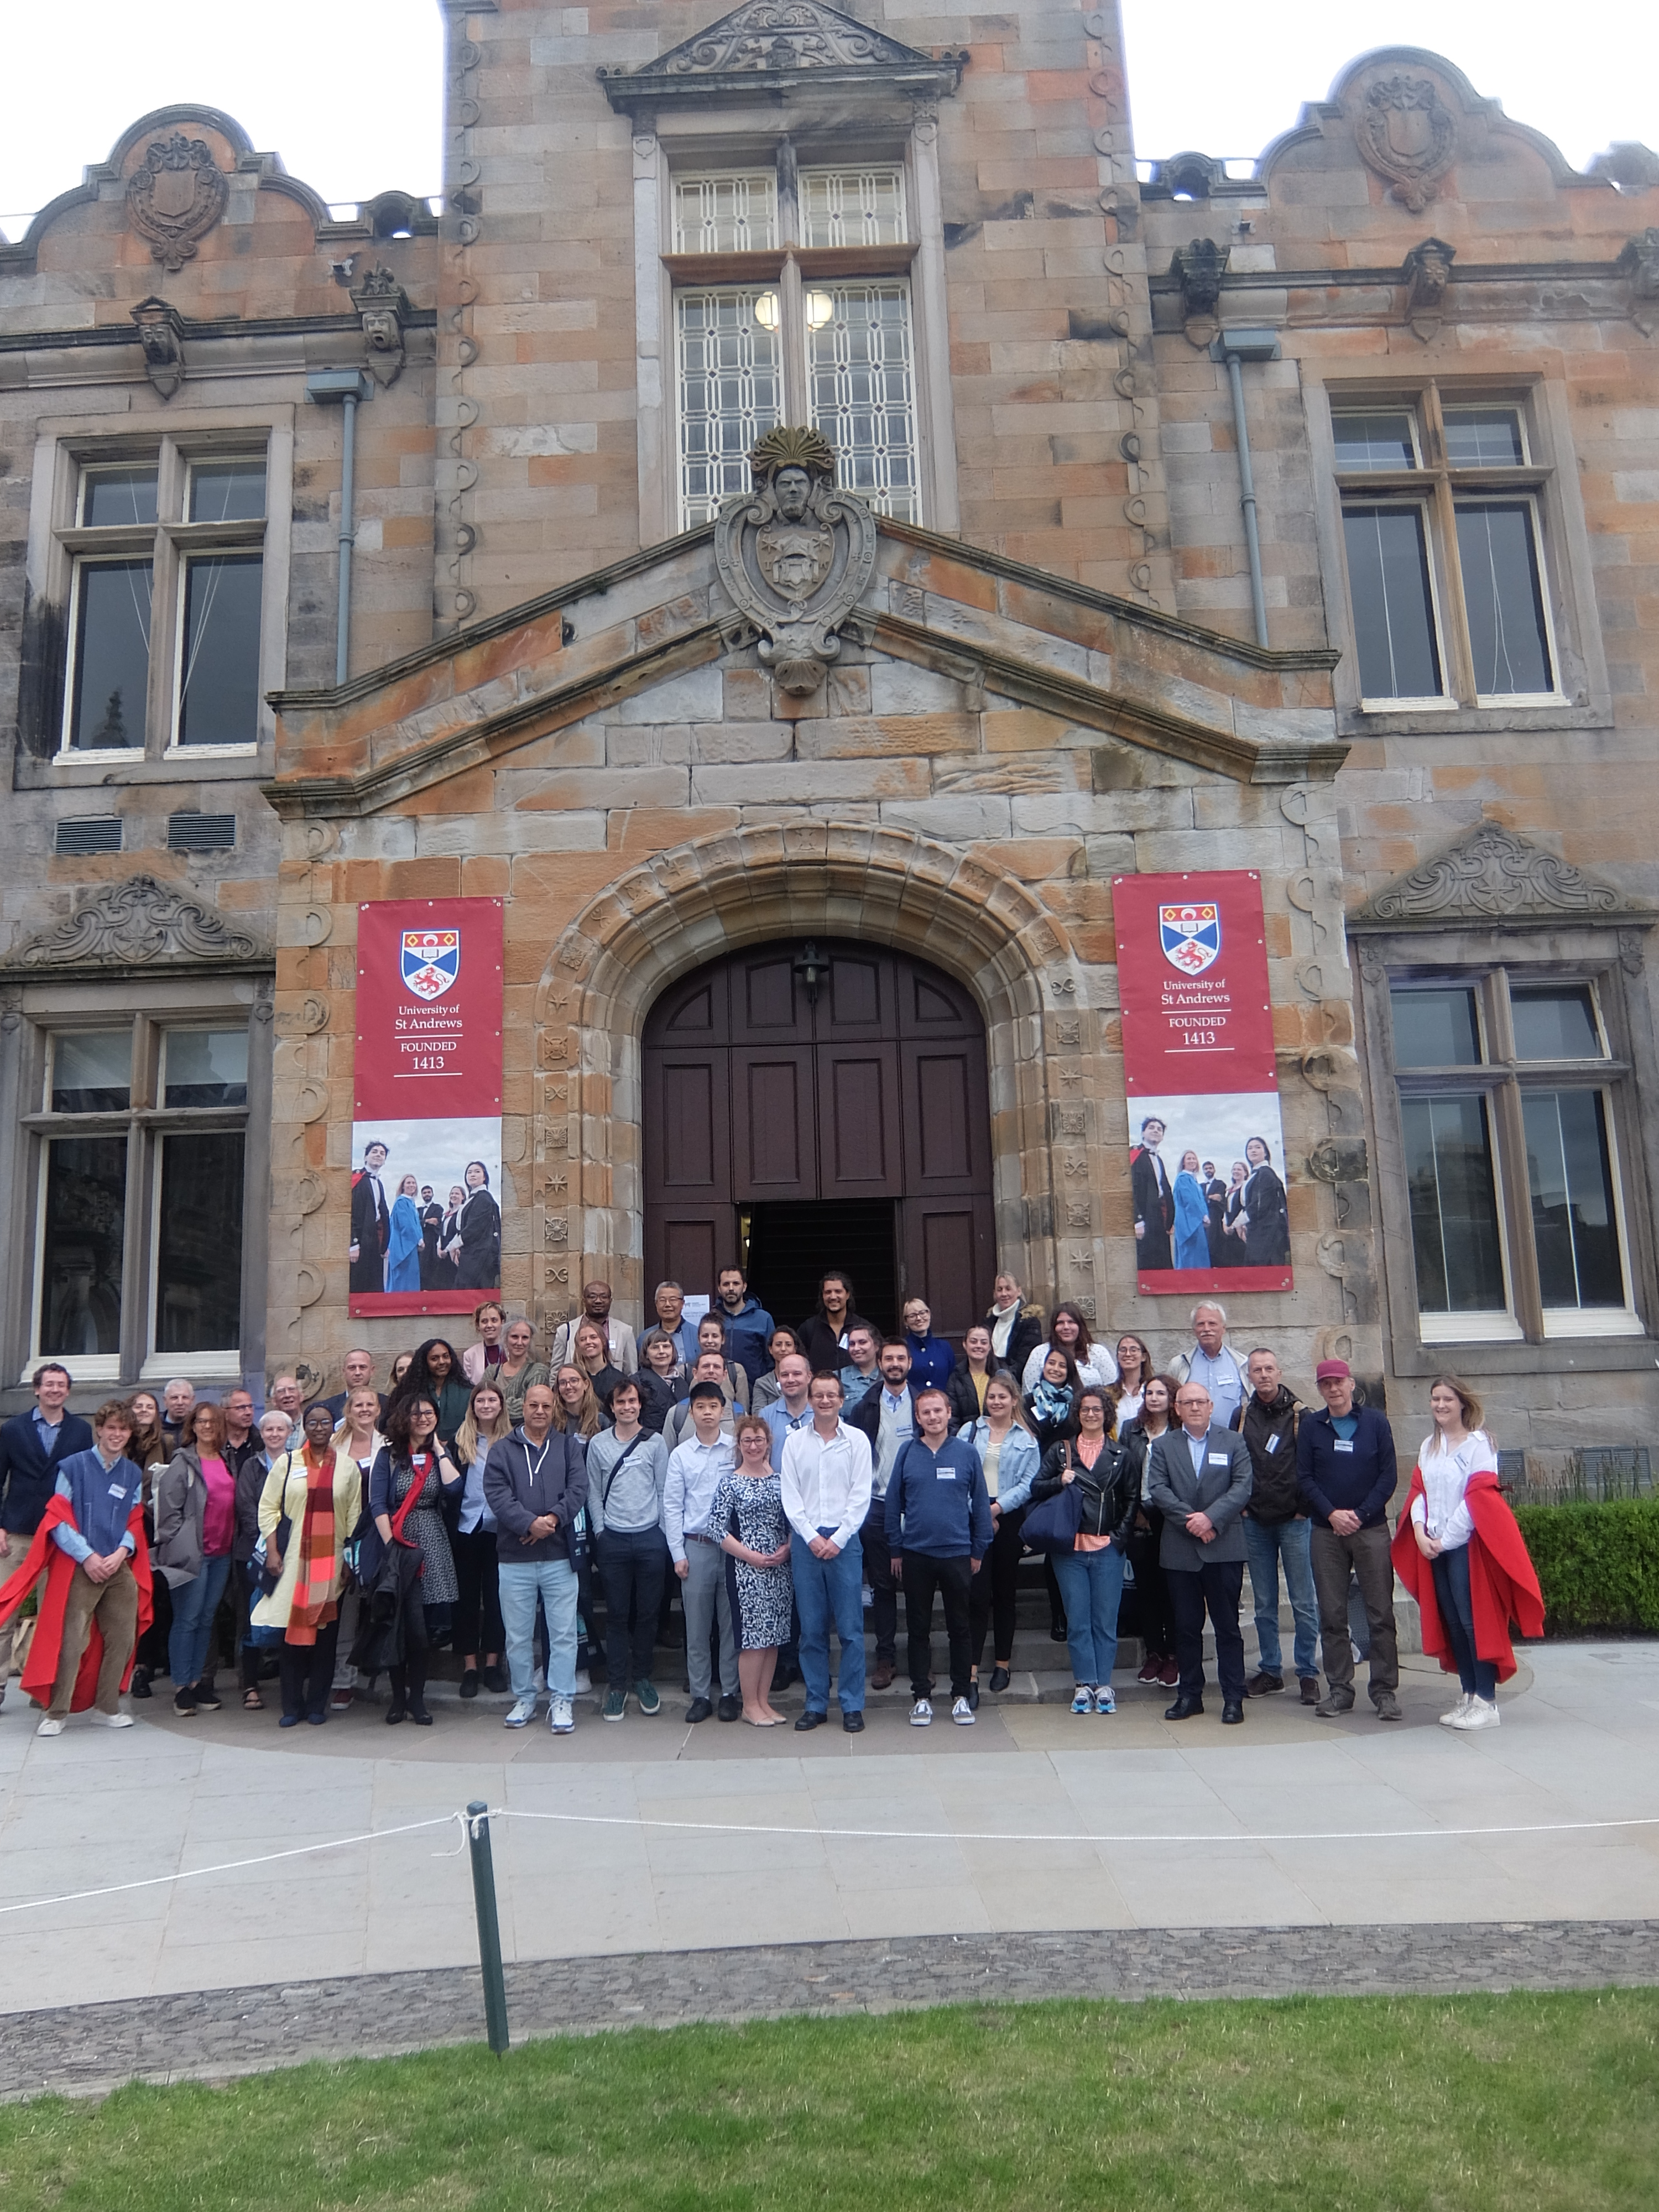 Conference Organisers and Attendees gather at Lower College Hall,  University of St Andrews  